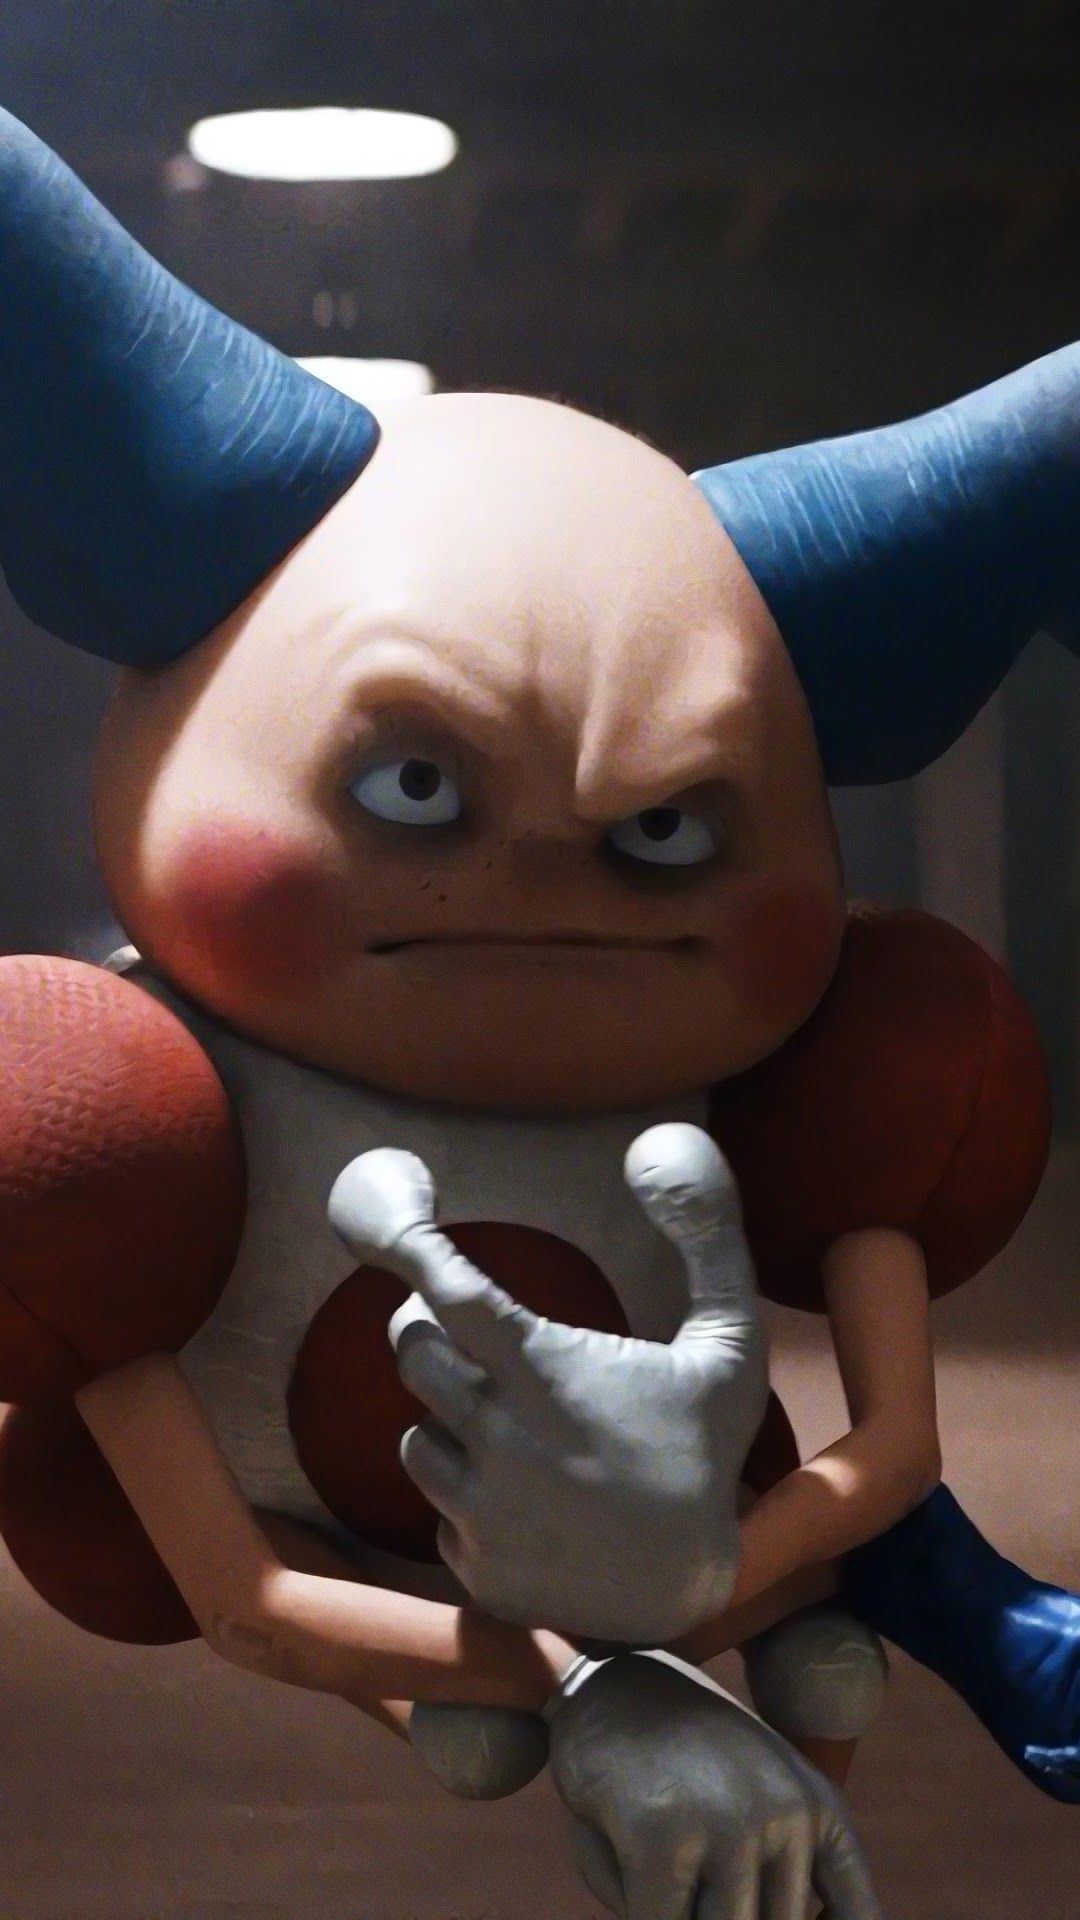 Mr. Mime, Pokemon: Detective Pikachu phone HD Wallpaper, Image, Background, Photo and Picture. Mocah.org HD Wallpaper